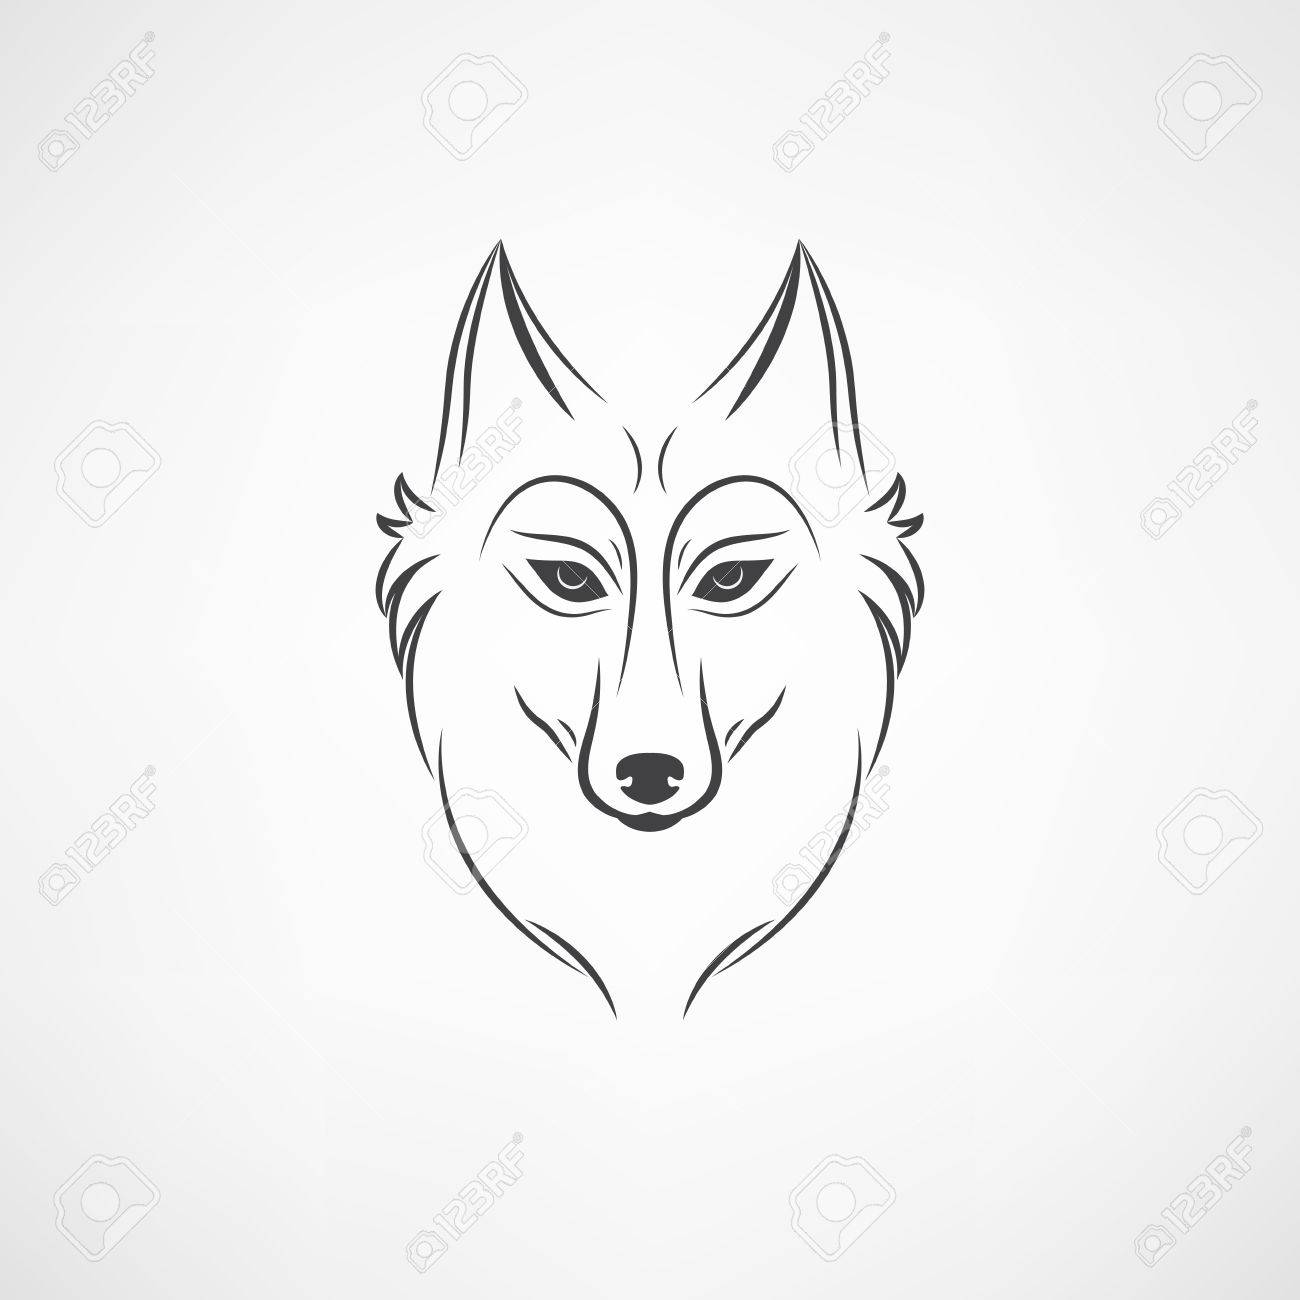 Illustration of wolf face vector illustration - Search Clipart 